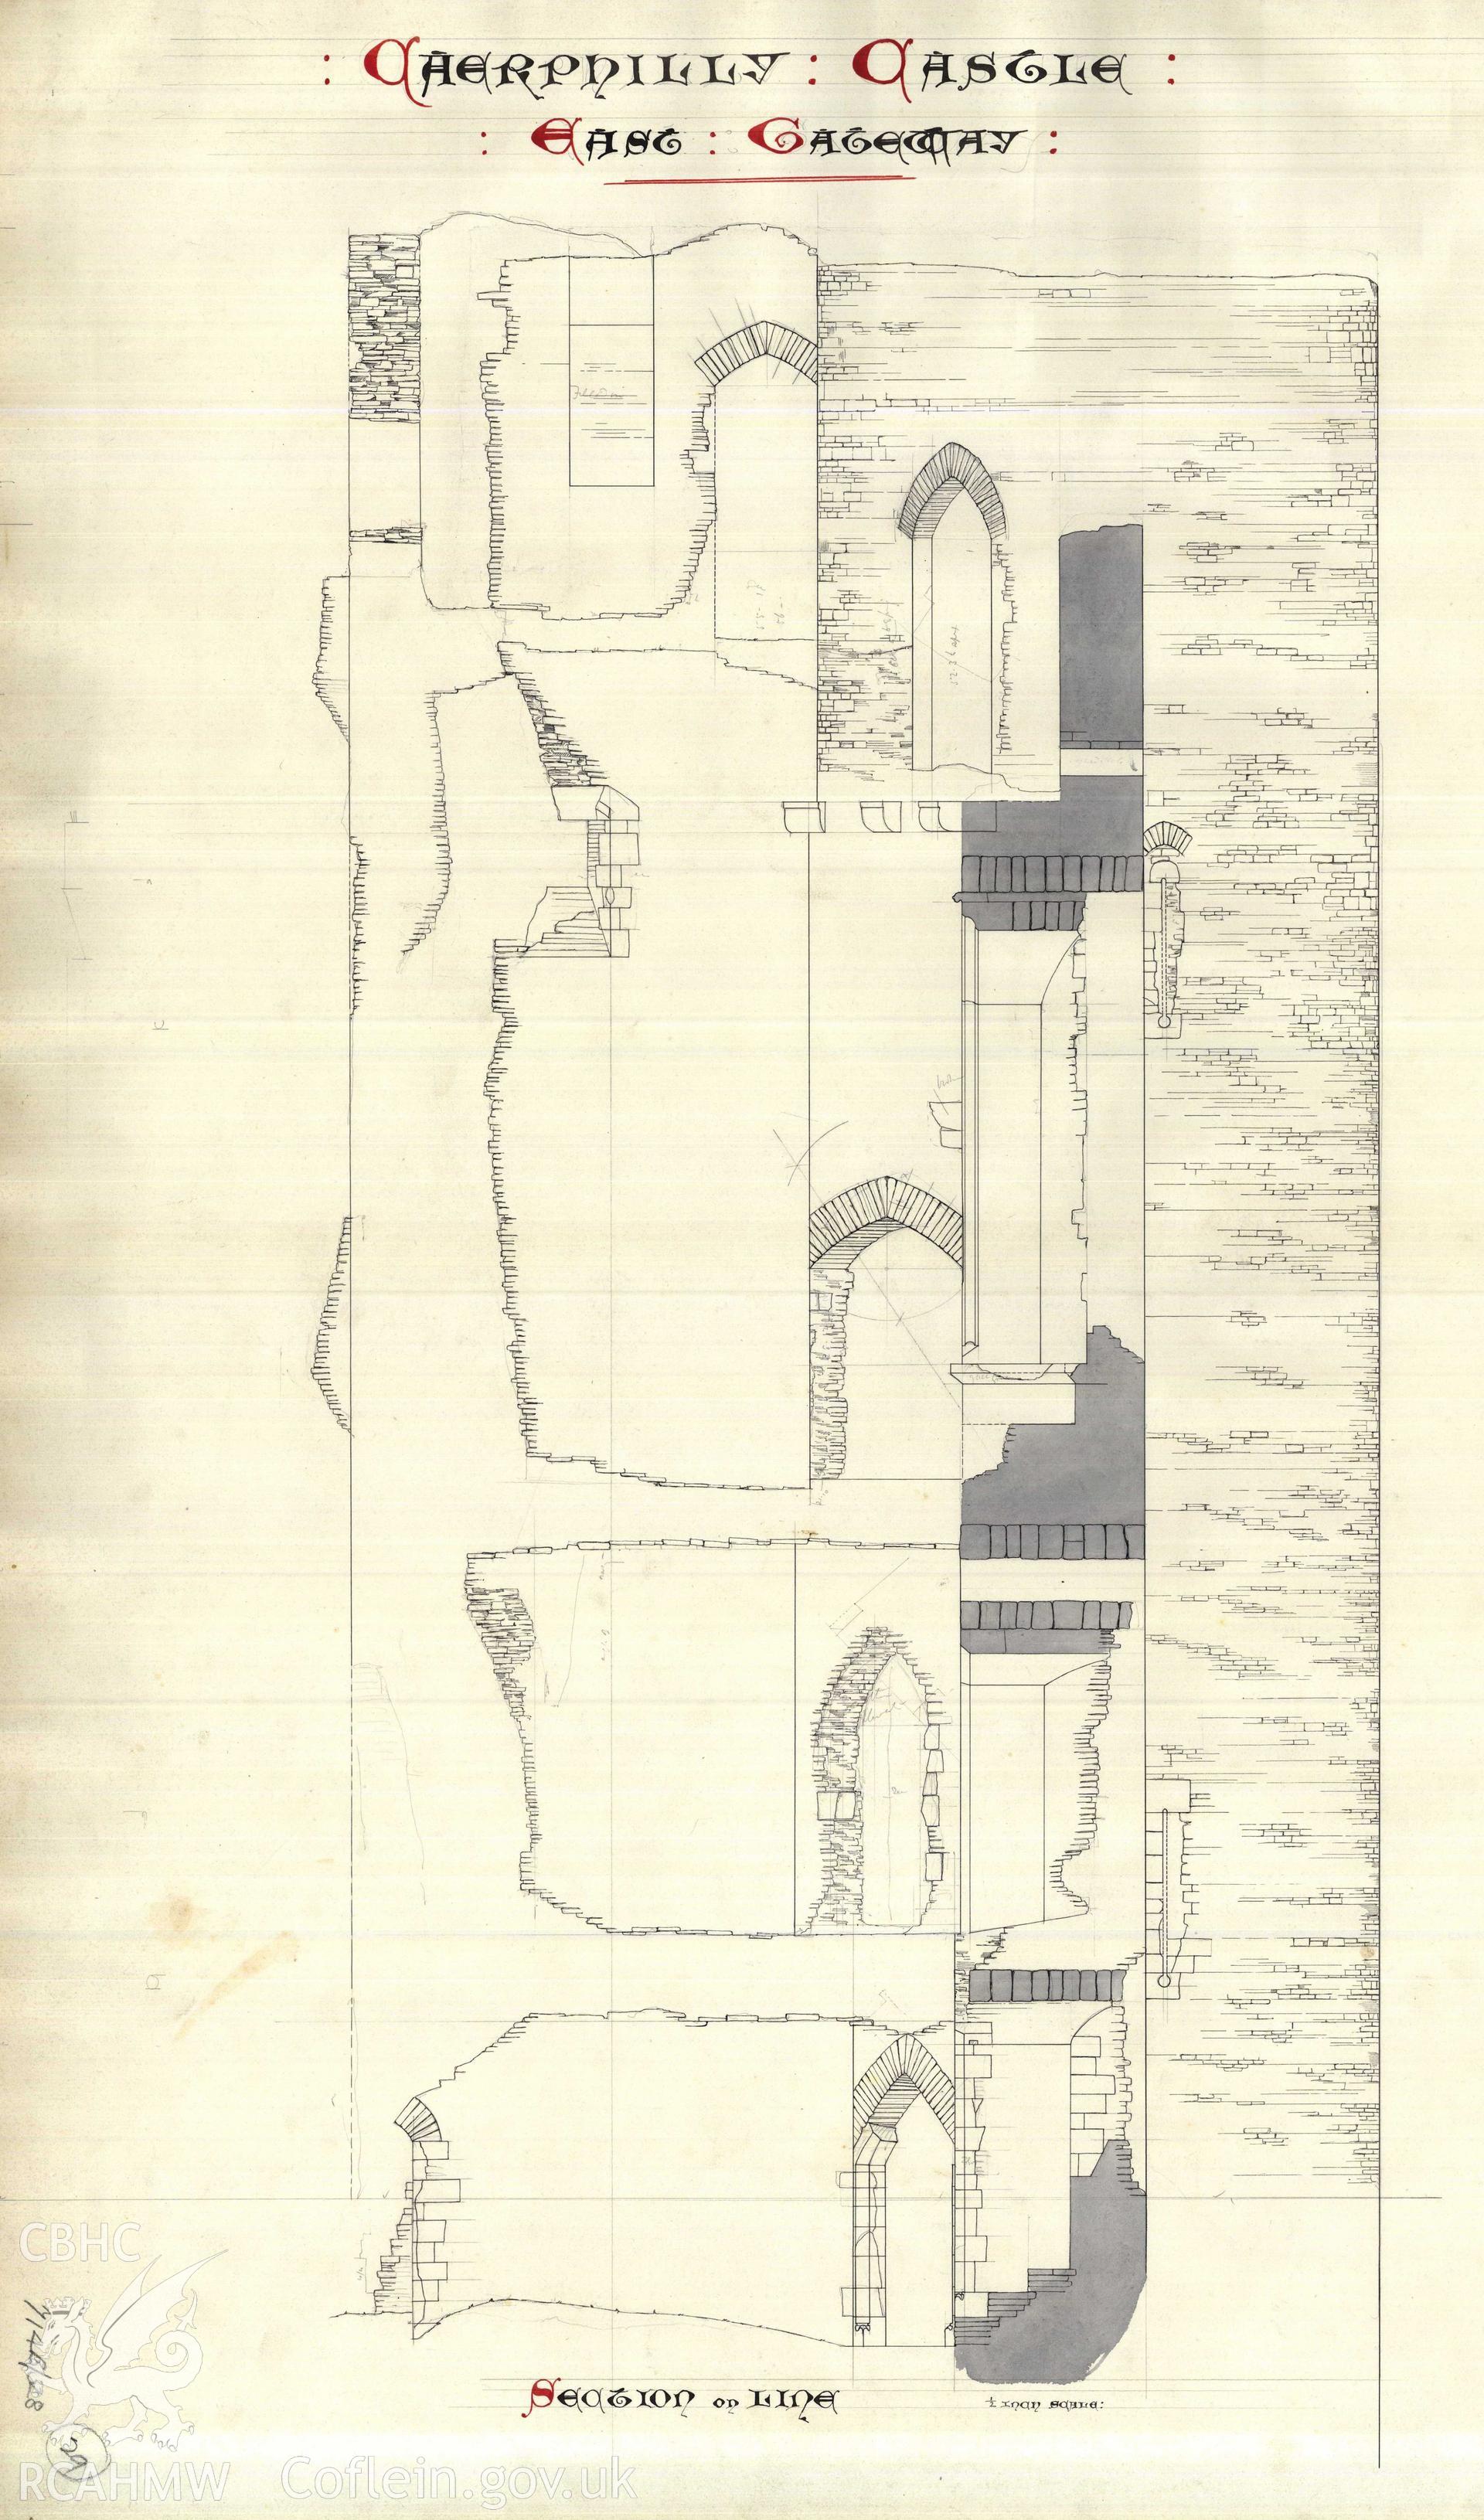 Cadw guardianship monument drawing of Caerphilly Castle. Section, East gateway. Cadw Ref. No. 714B/328. Scale 1:24.